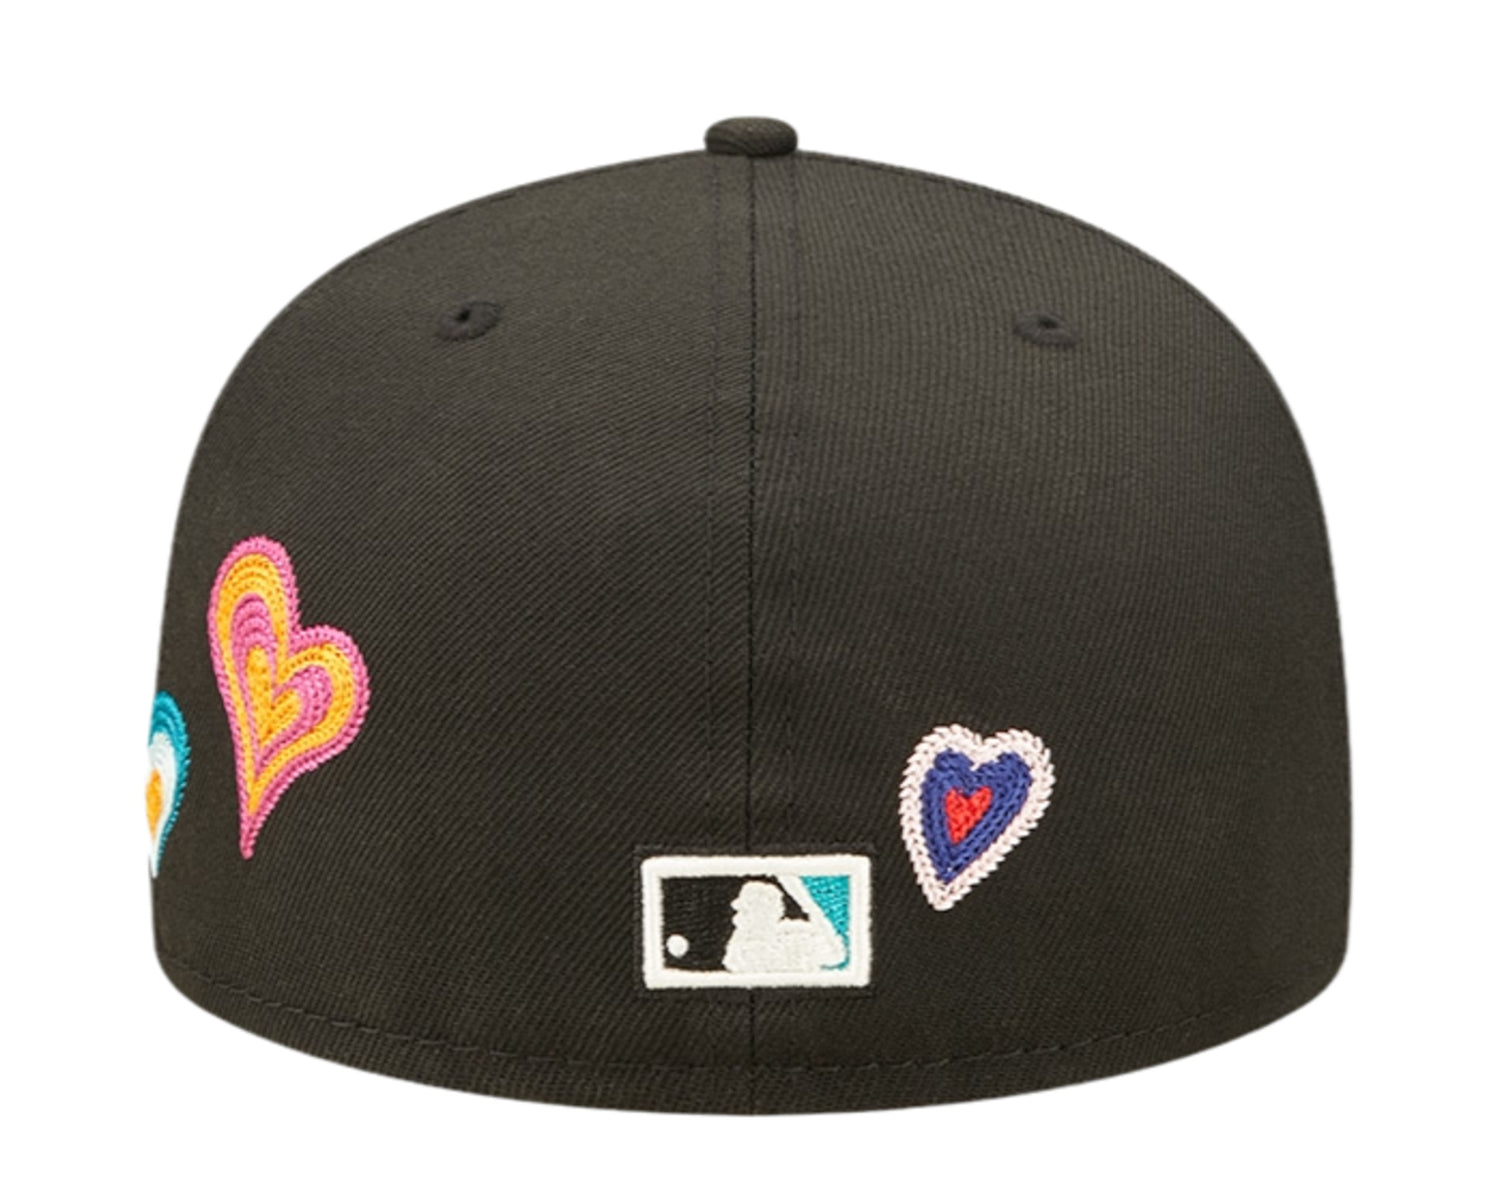 New Era 59Fifty MLB Florida Marlins Chain Stitch Heart Fitted Hat W/ Pink Undervisor